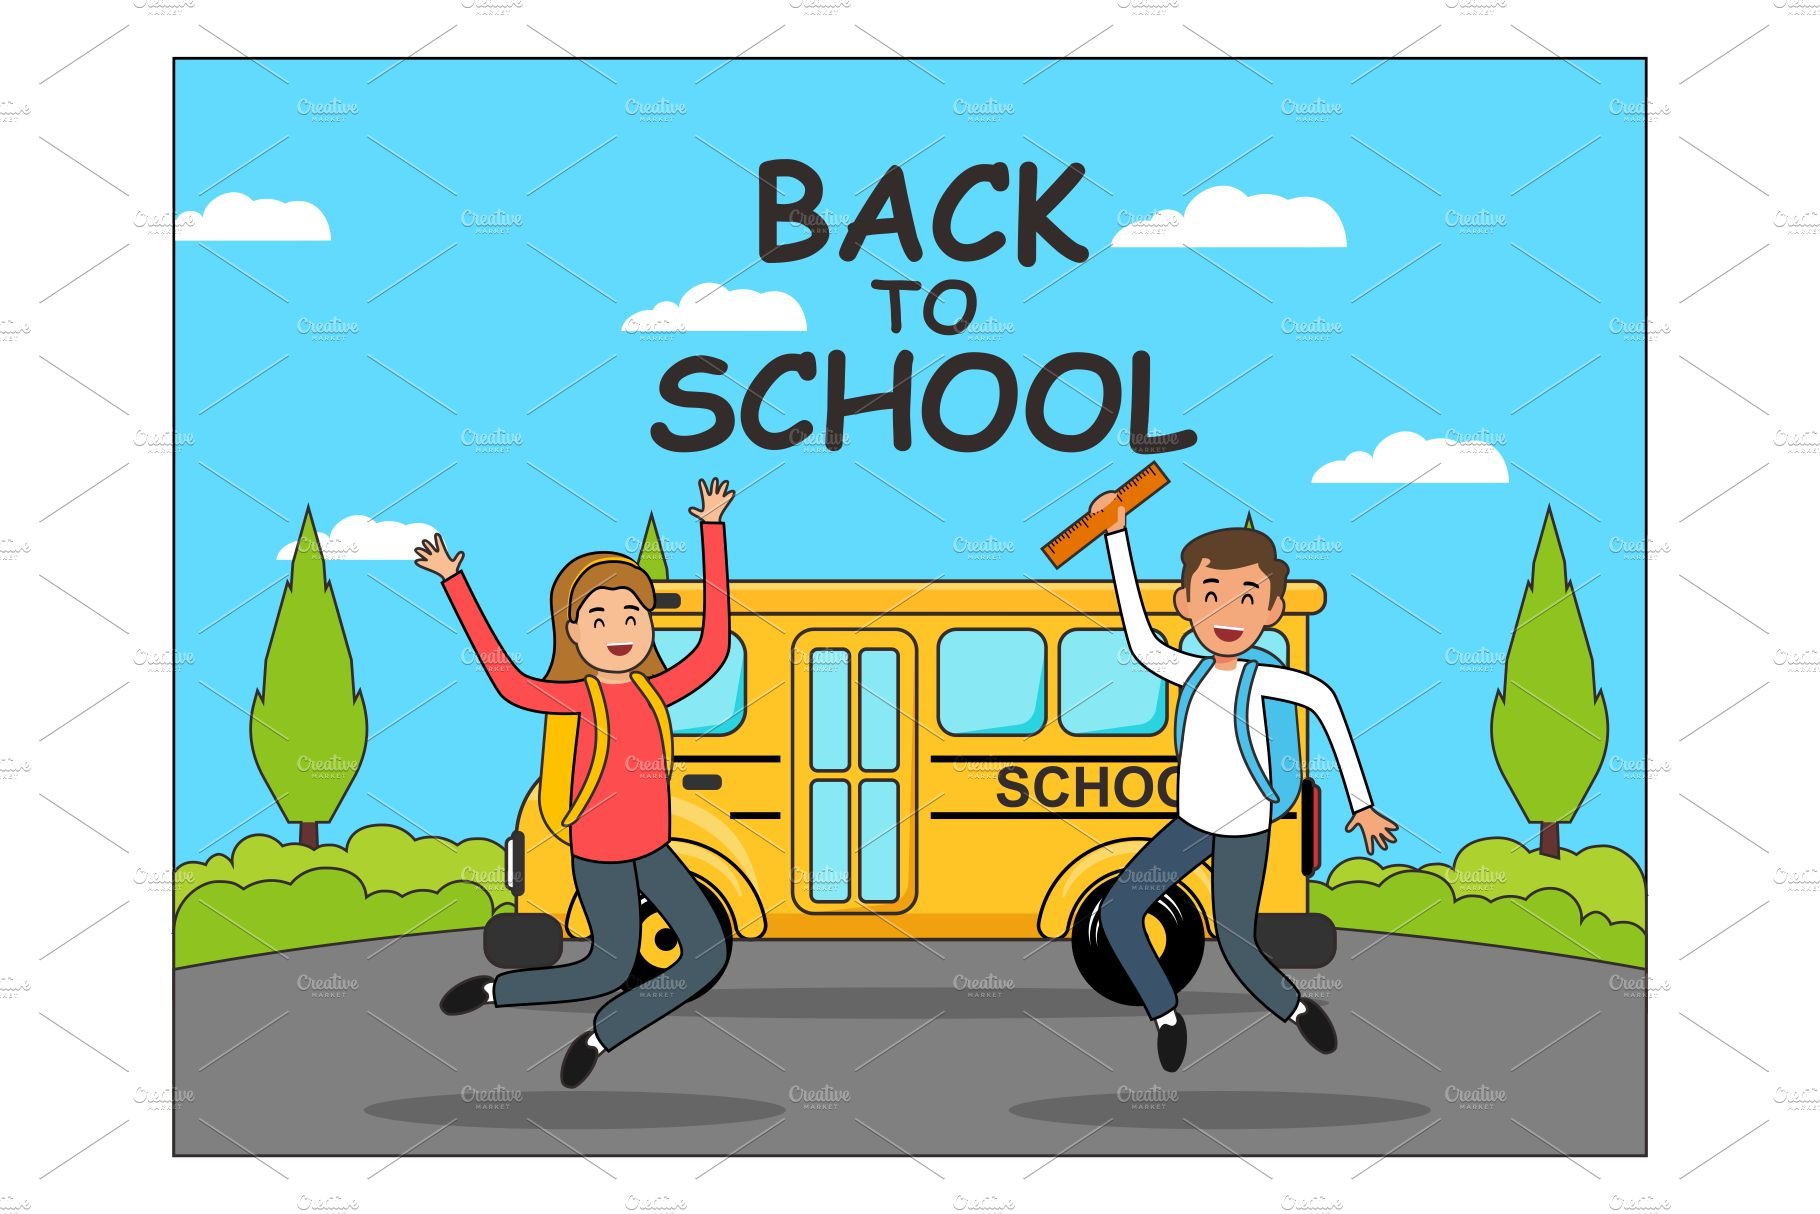 Back to School, School bus flat cover image.